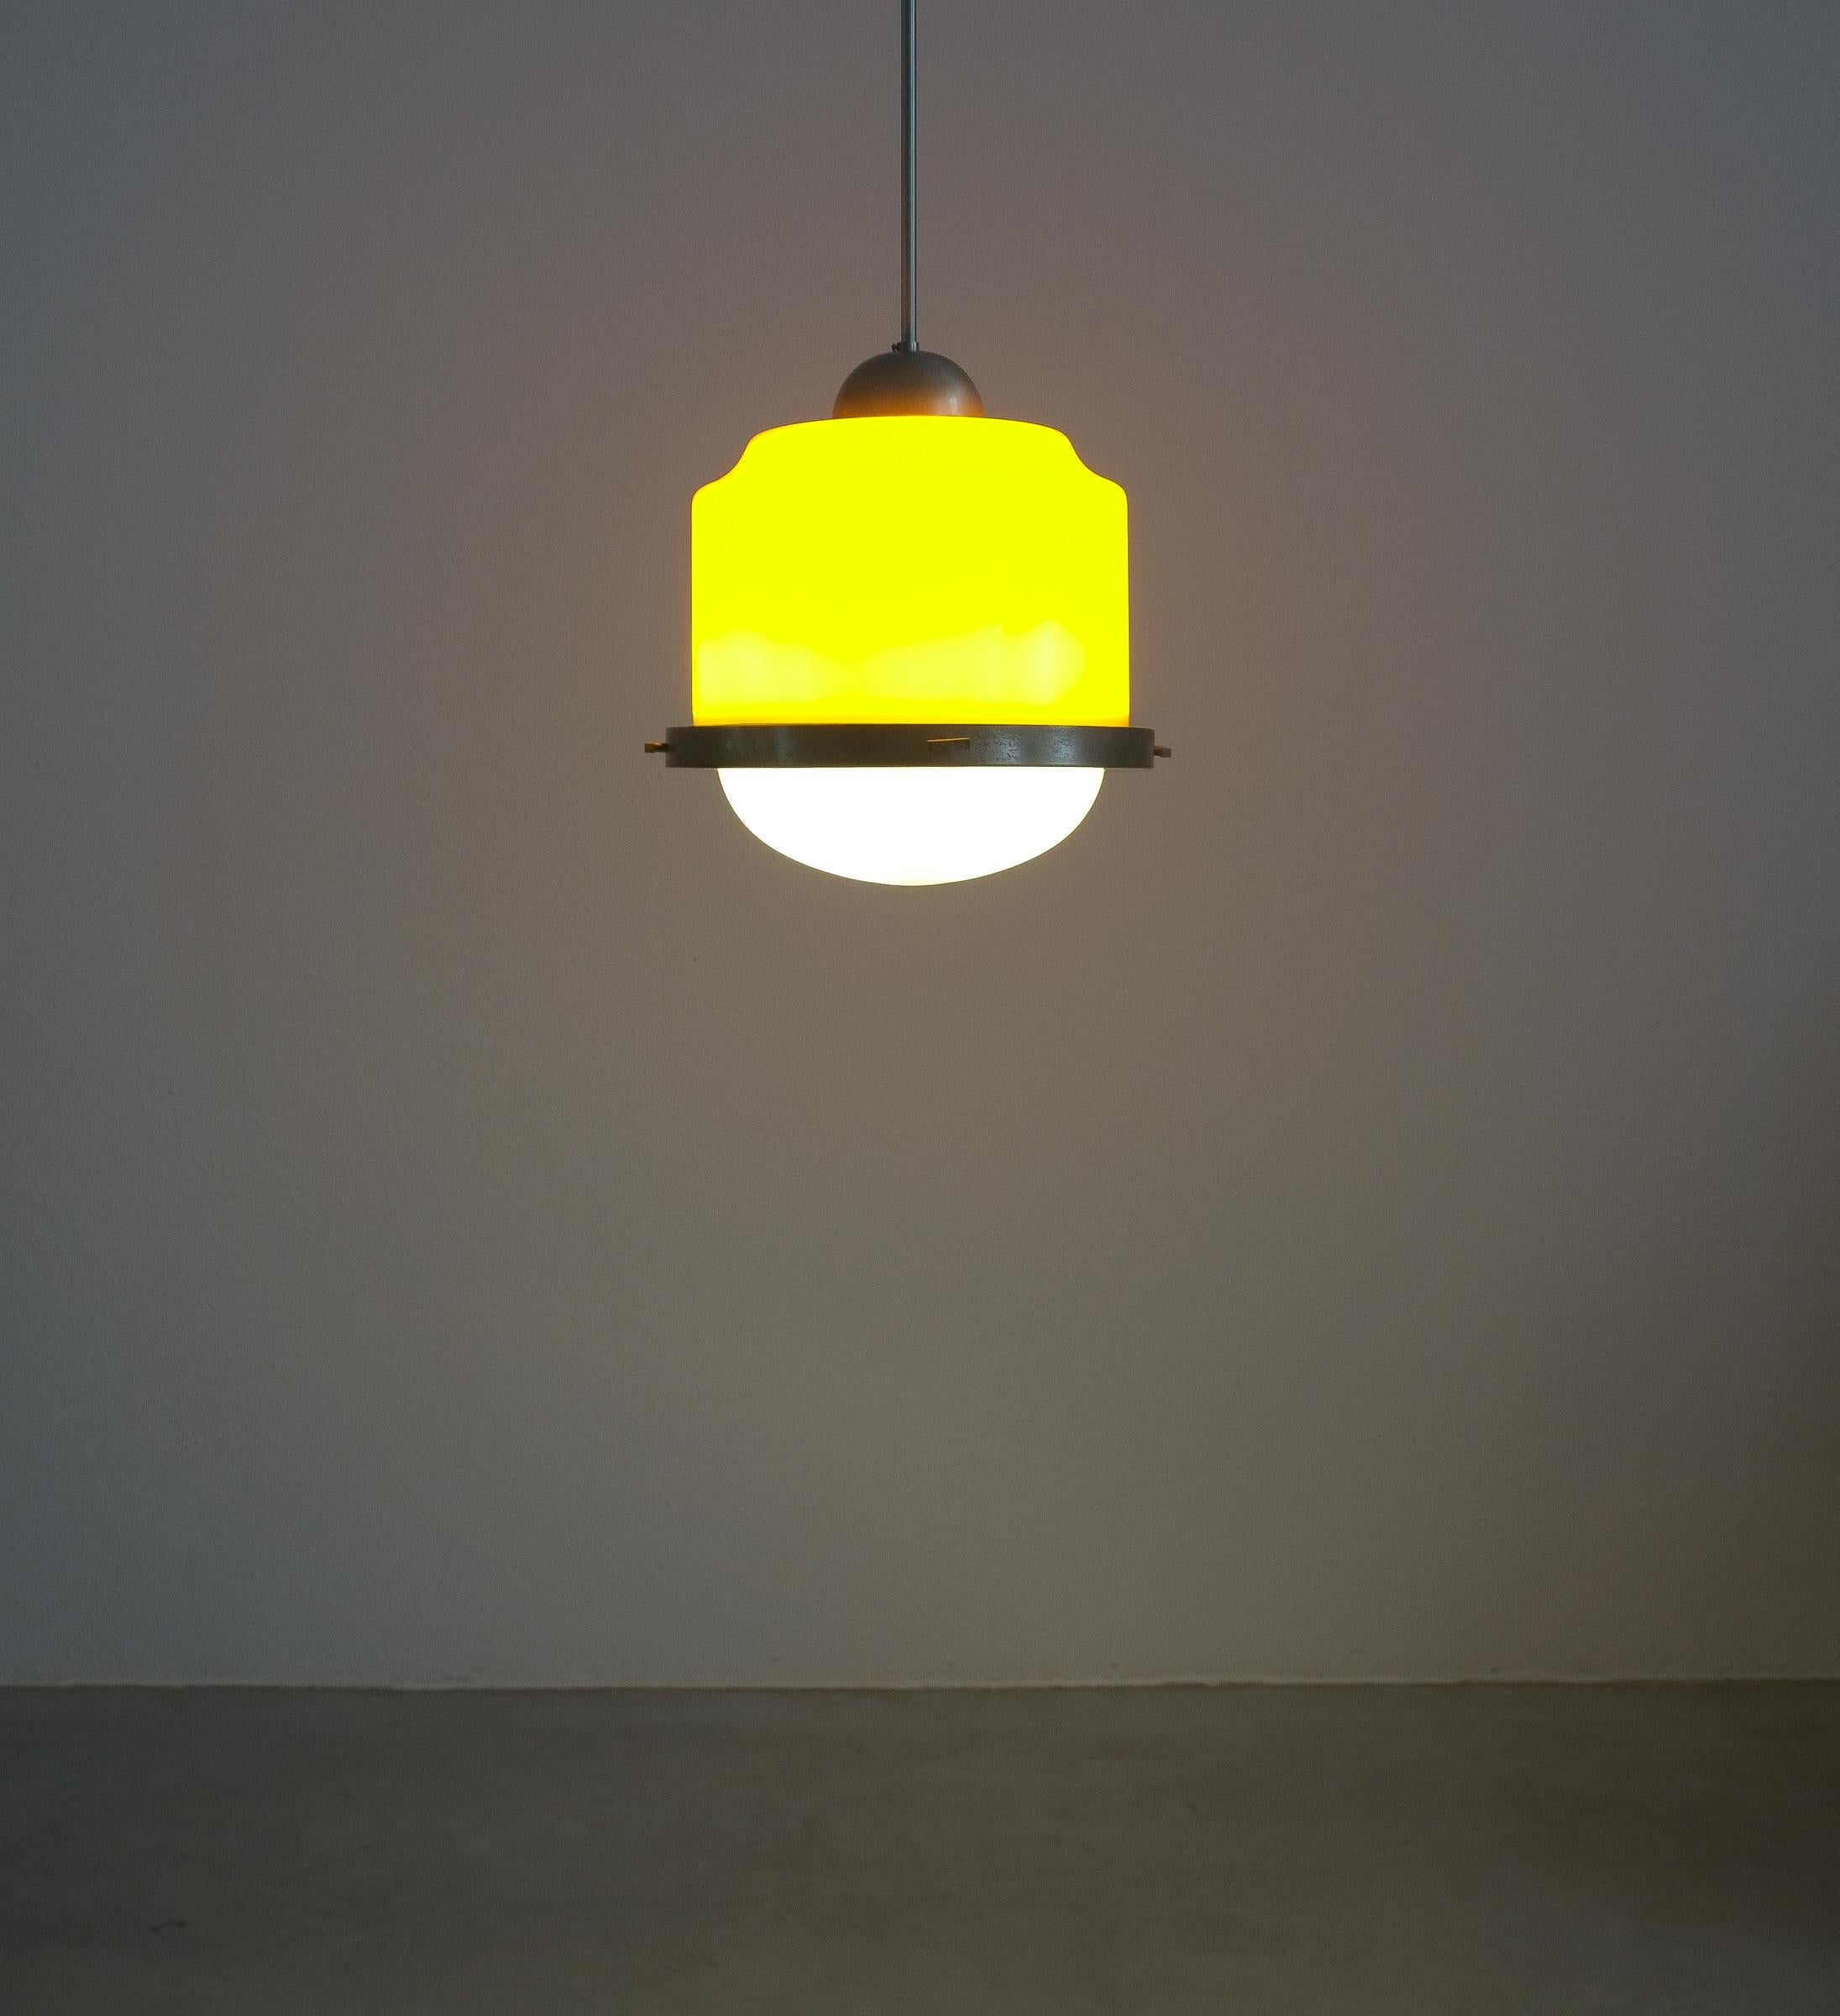 Stilnovo yellow glass pendant lamp glass, circa 1950

Beautiful Italian pendant light with a yellow glass shade and a white opal glass down light shade. Aluminum and steel hardware. It takes 3 e14 light bulbs, LED's are working also. It's in good